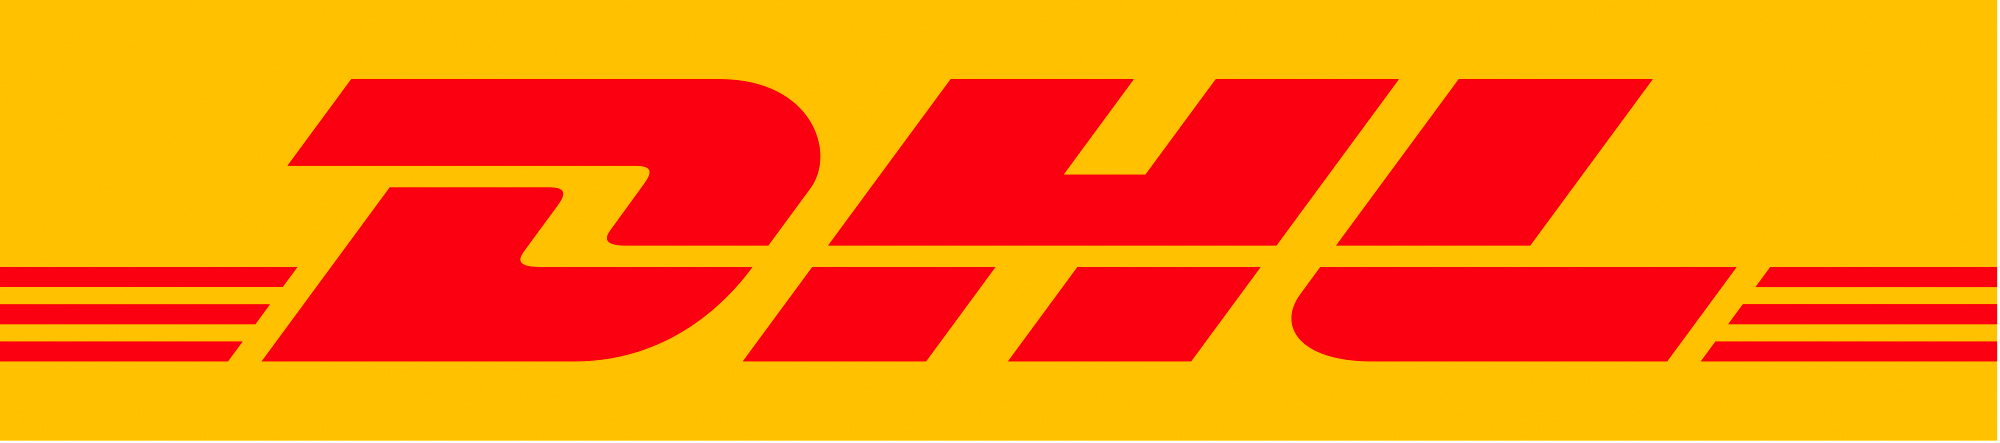 Logo of Piquee's client Dhl